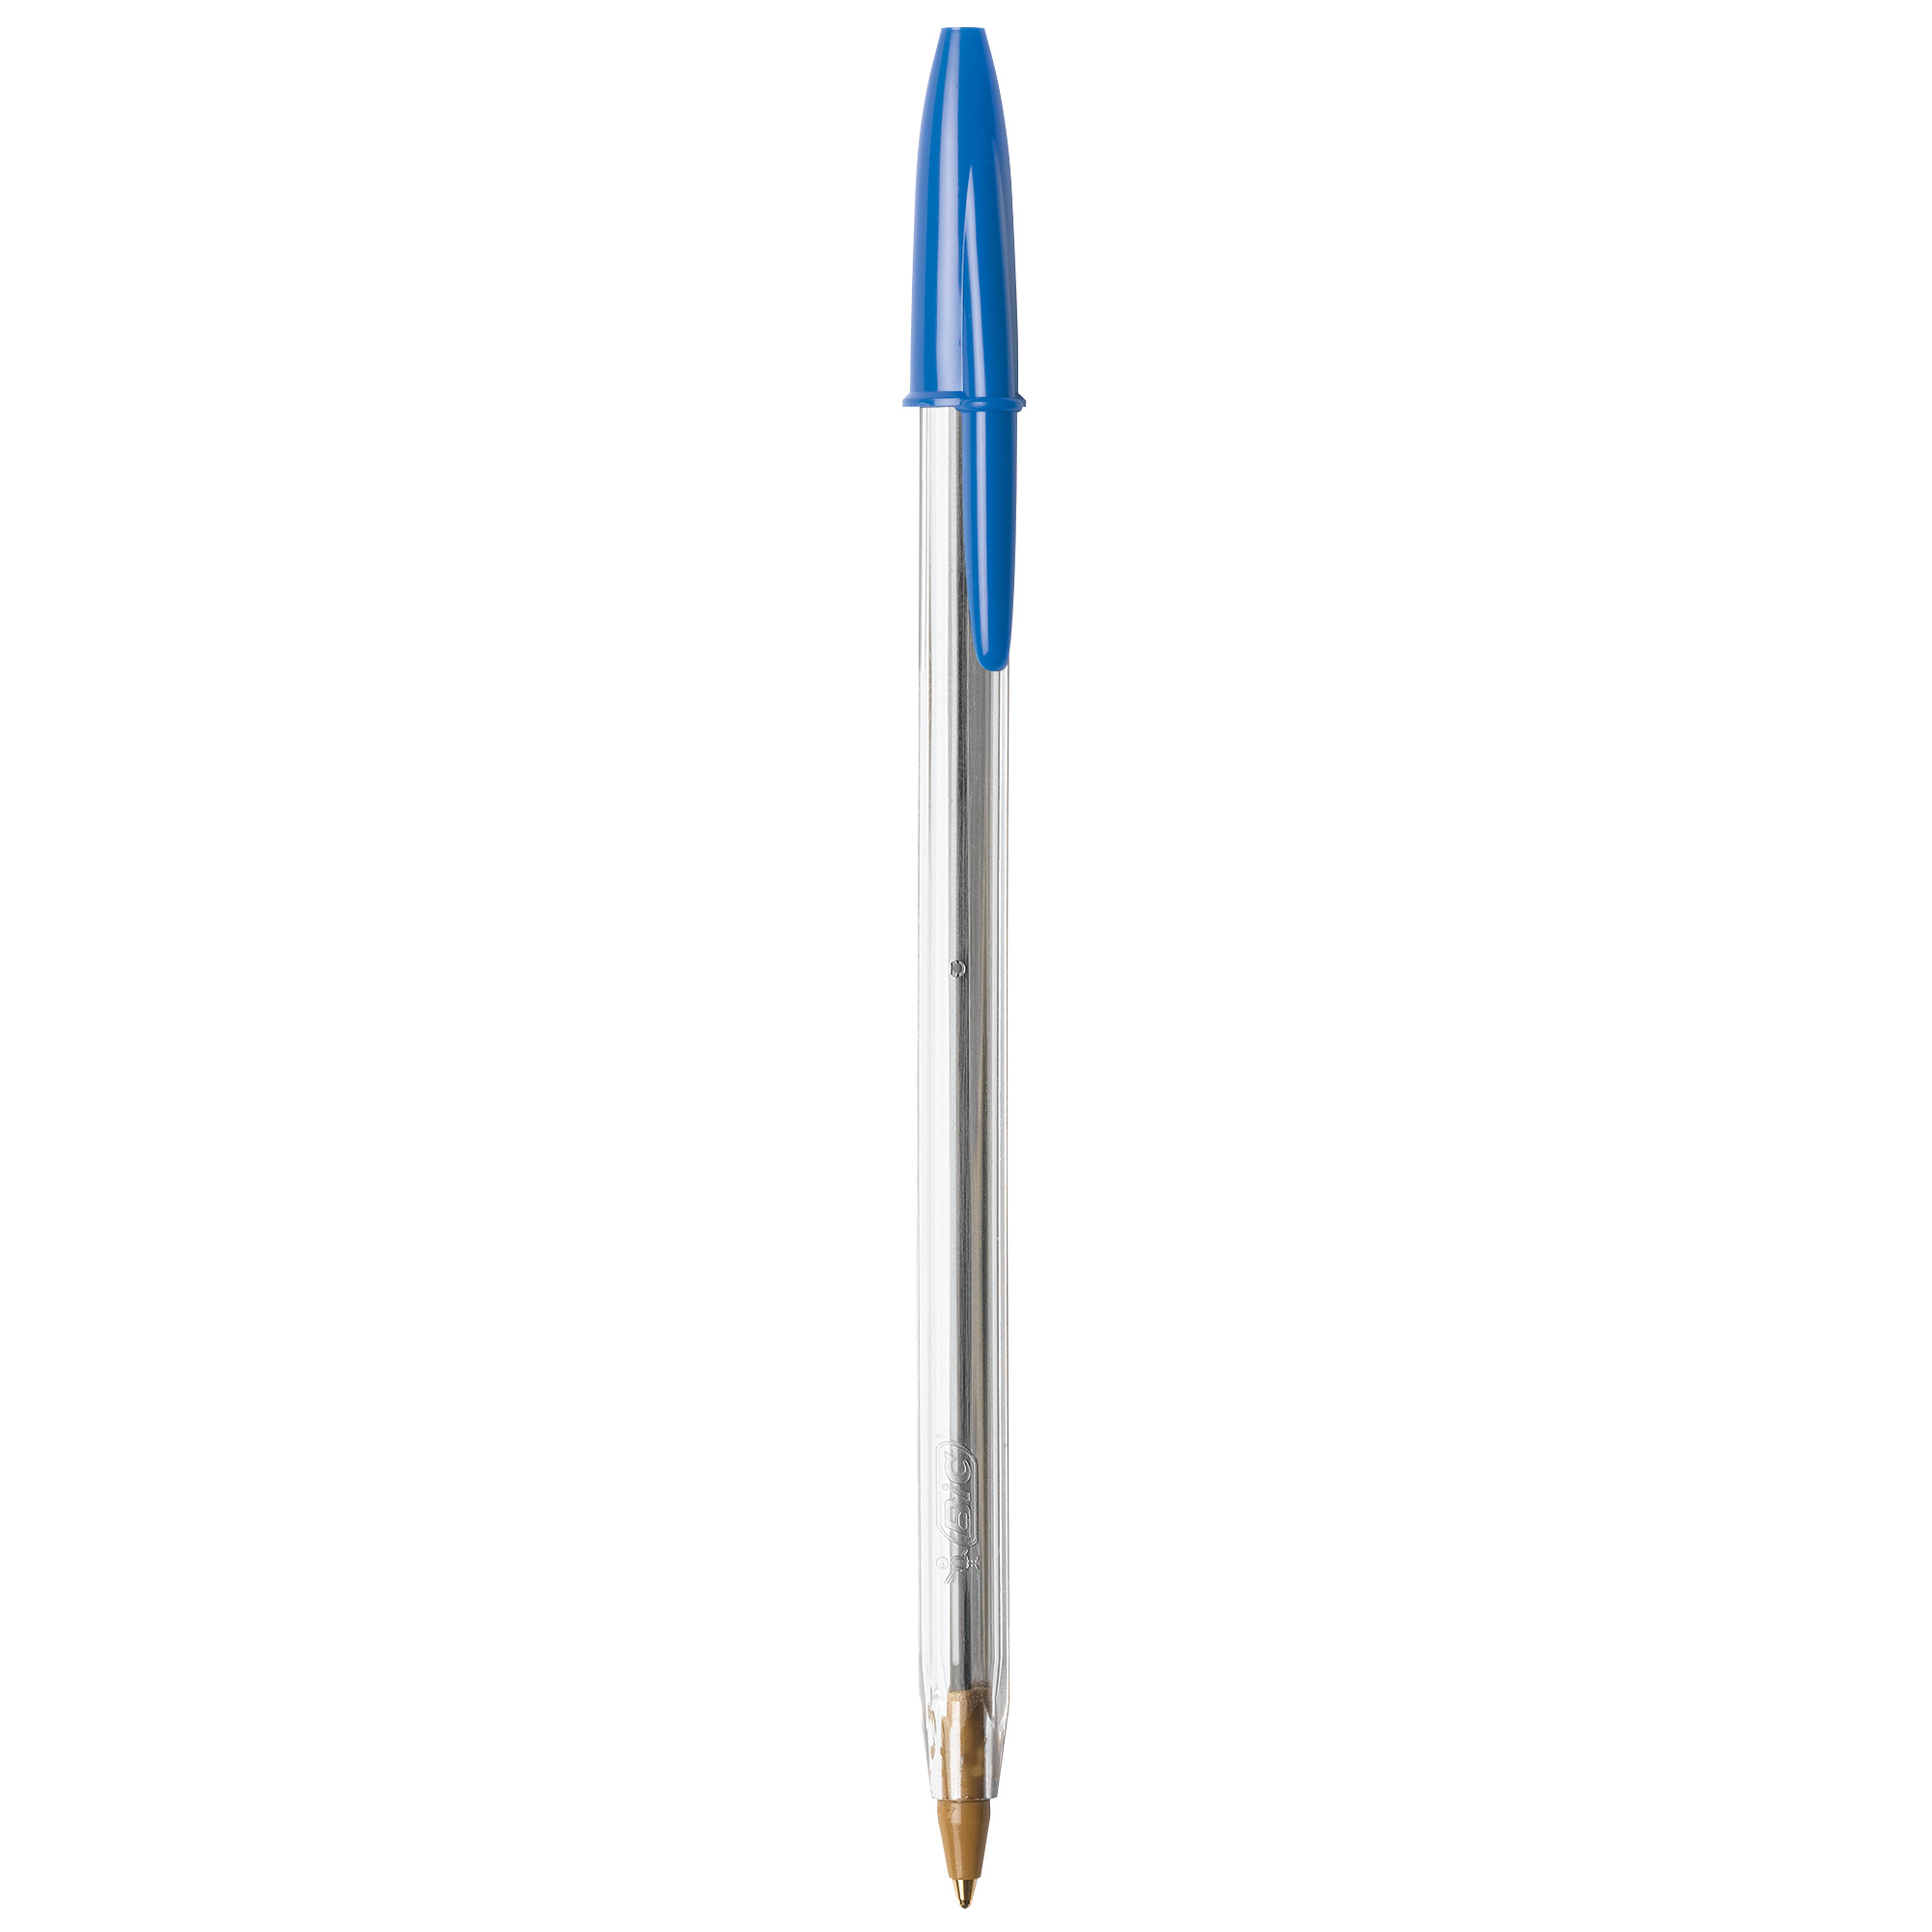 BIC Cristal Xtra Smooth Ballpoint Stick Pens, 1.0 mm, Blue Ink, Pack of 10 - image 4 of 10